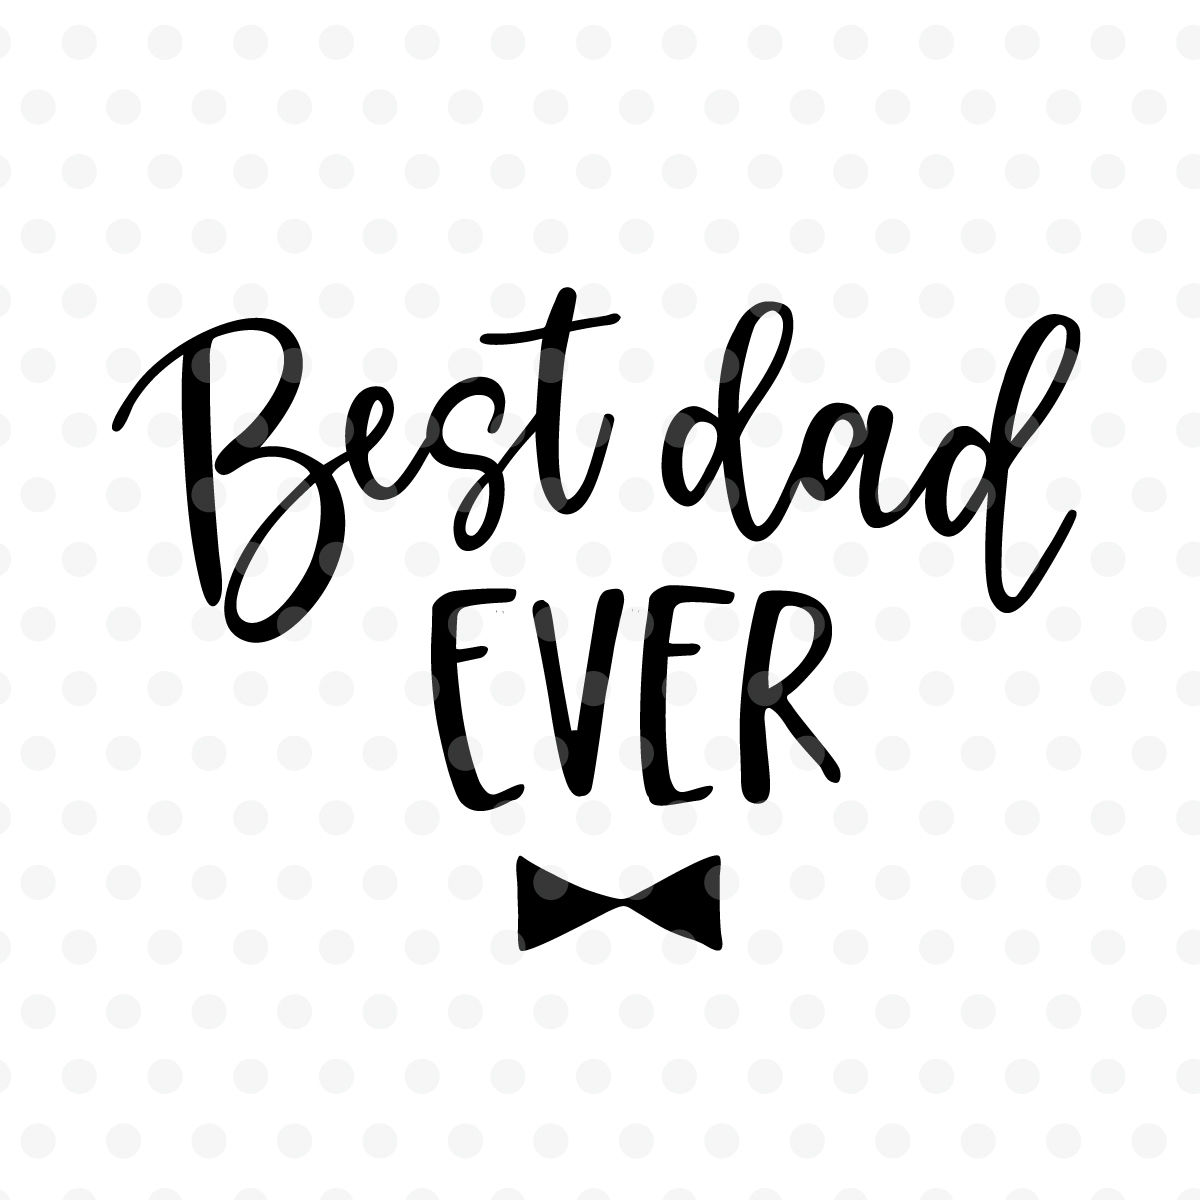 Download Best dad ever SVG, EPS, PNG, DXF By Tabita's shop ...